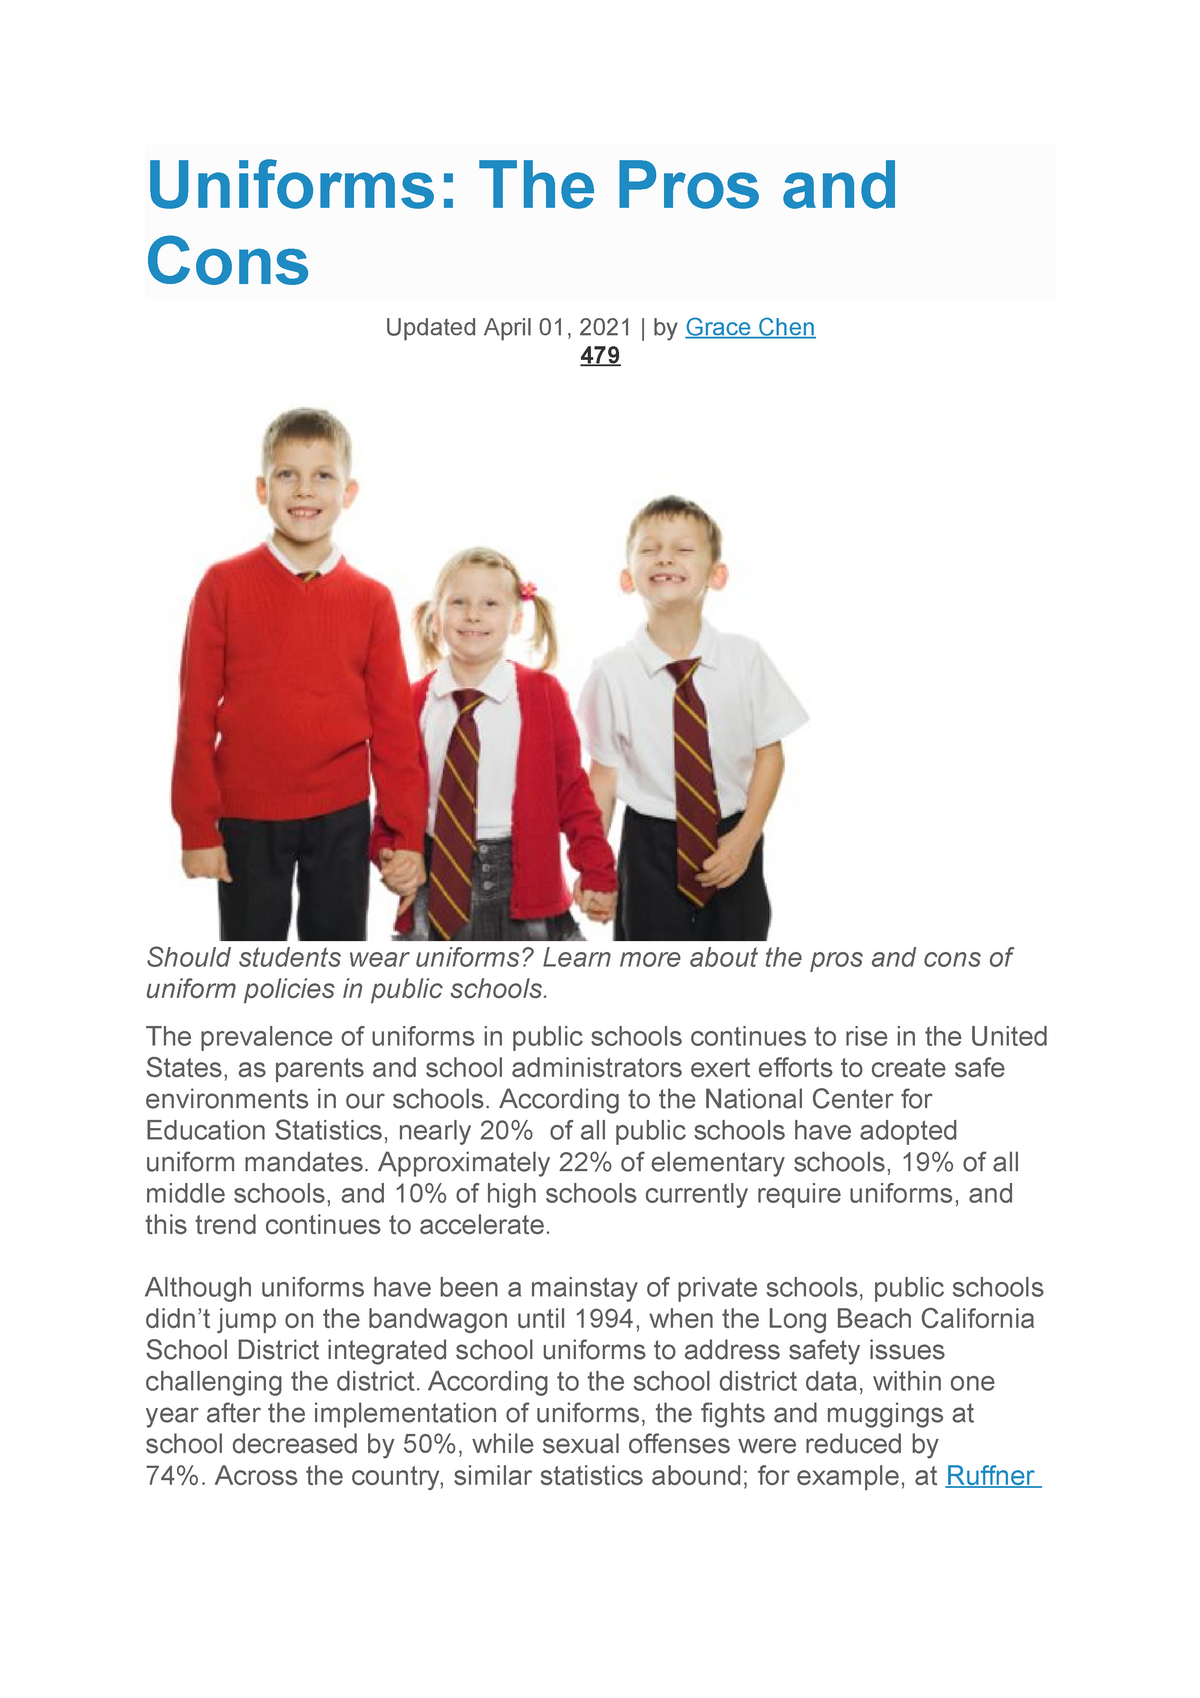 The Pros and Cons of School Uniforms